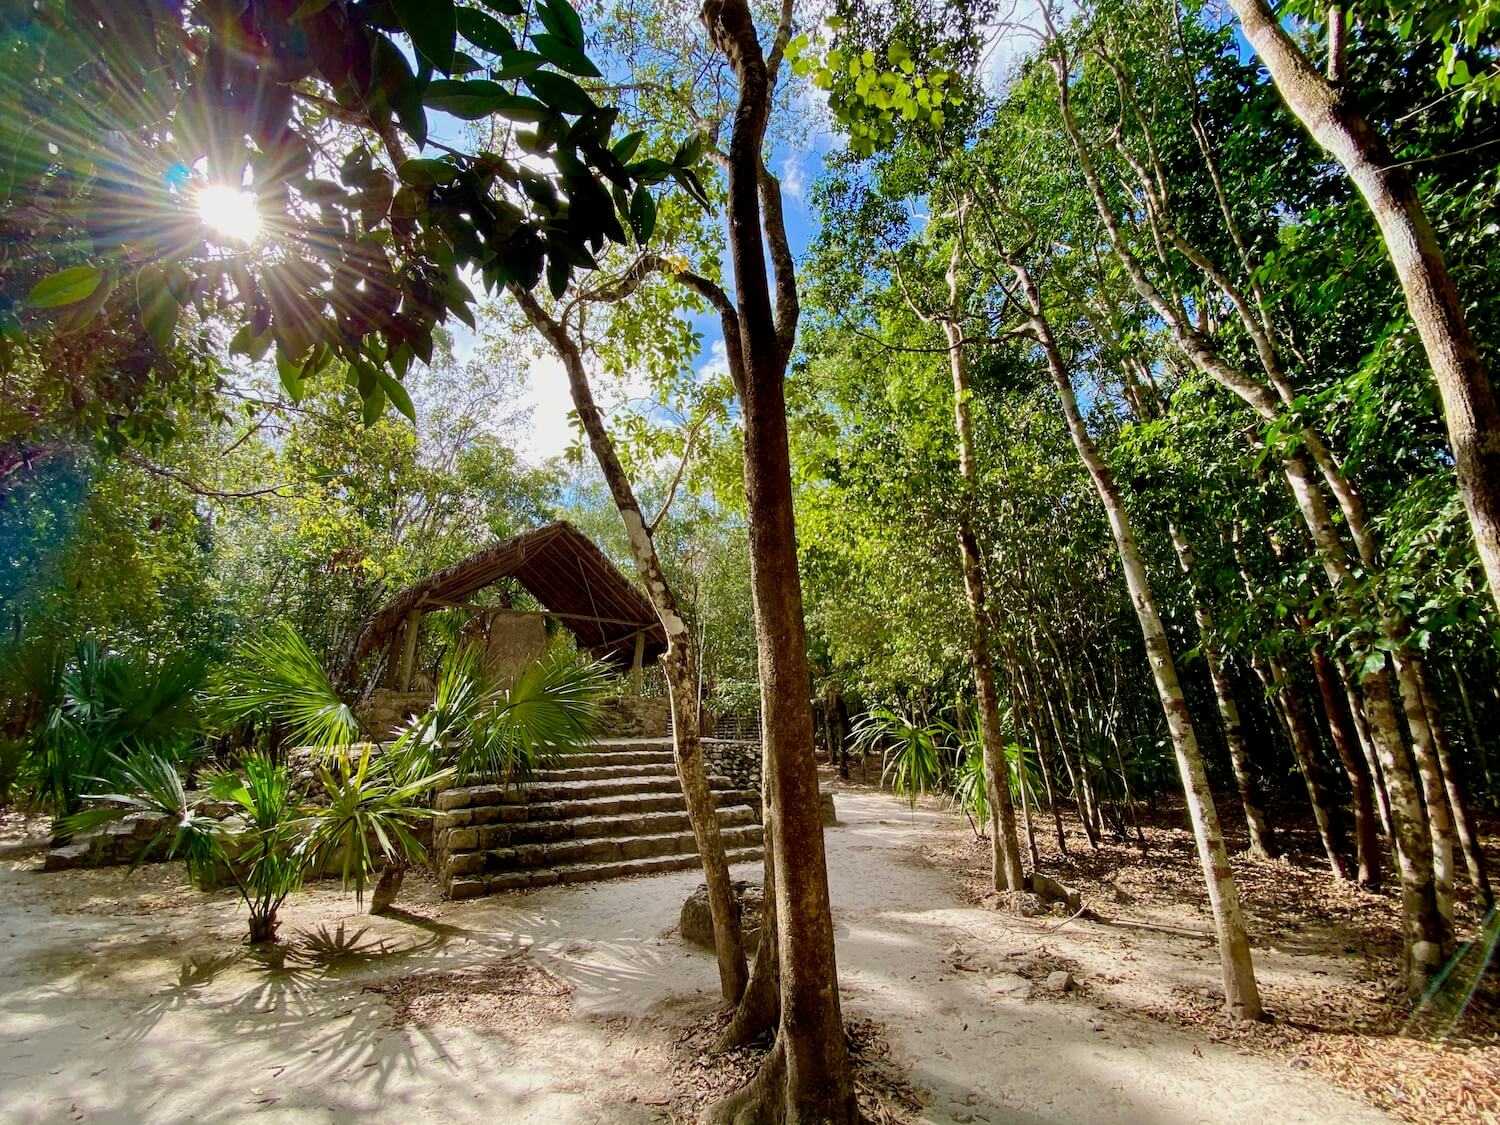 The morning sun shines through the thick jungle canopy of trees around ancient stone steps leading up to a large rock or Stele covered by a bamboo canopy.  This is located in the Macanxoc grouping of temples and glyphs in the ancient mayan city of Coba.